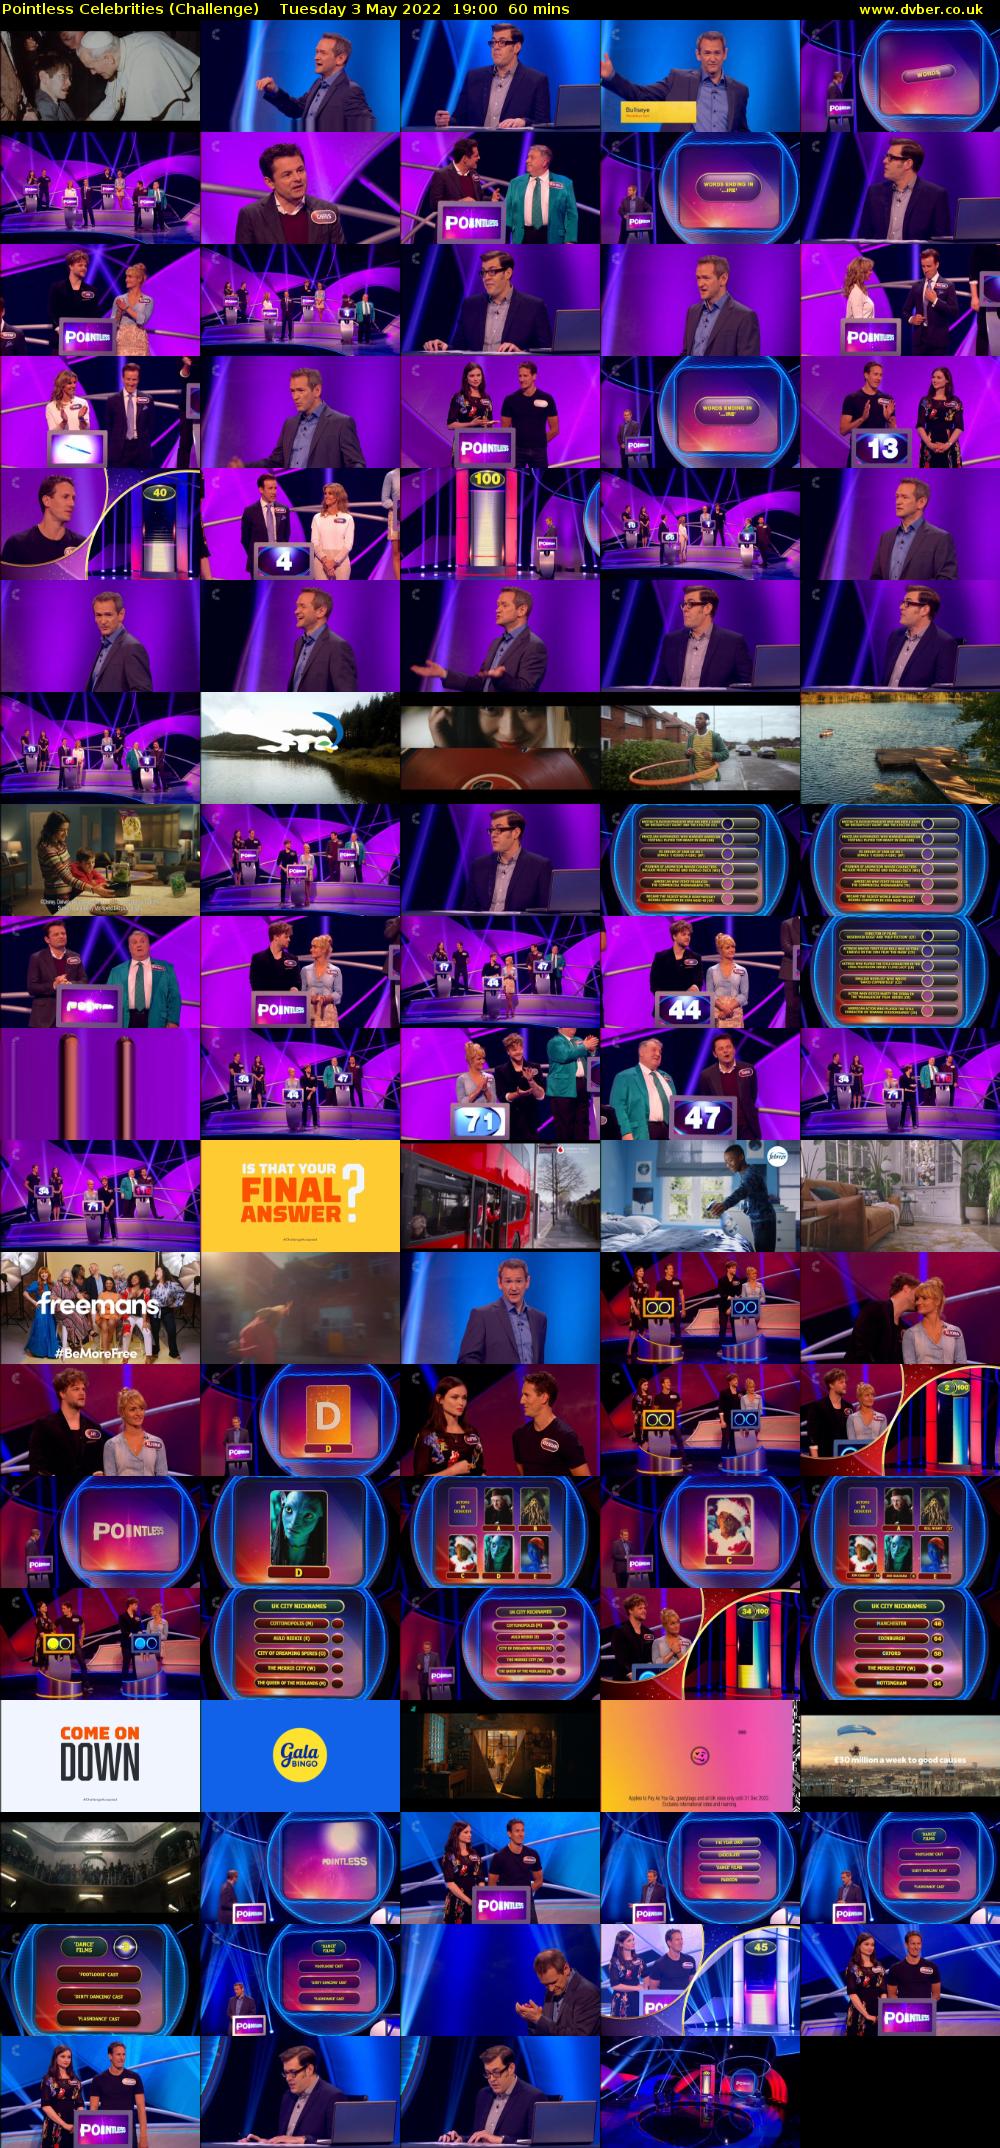 Pointless Celebrities (Challenge) Tuesday 3 May 2022 19:00 - 20:00